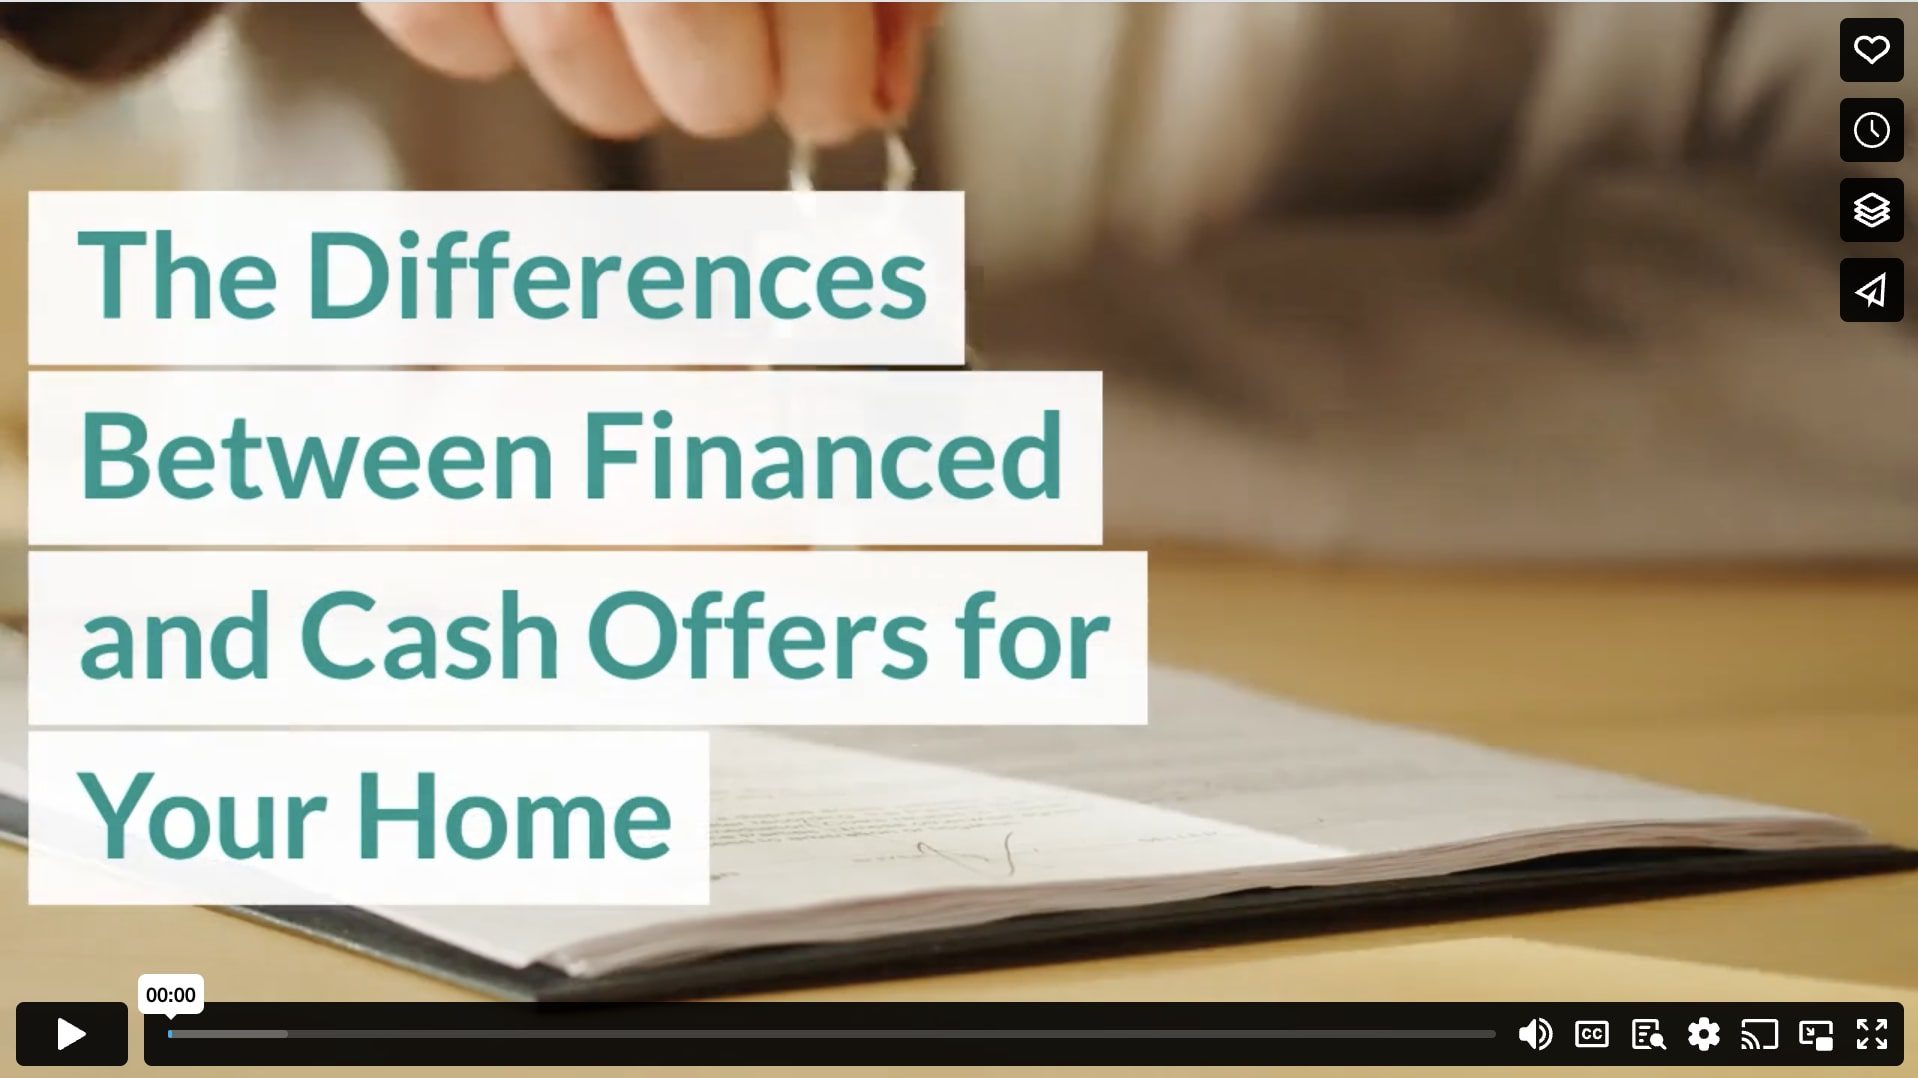 The Differences Between Financed and Cash Offers for Your Home